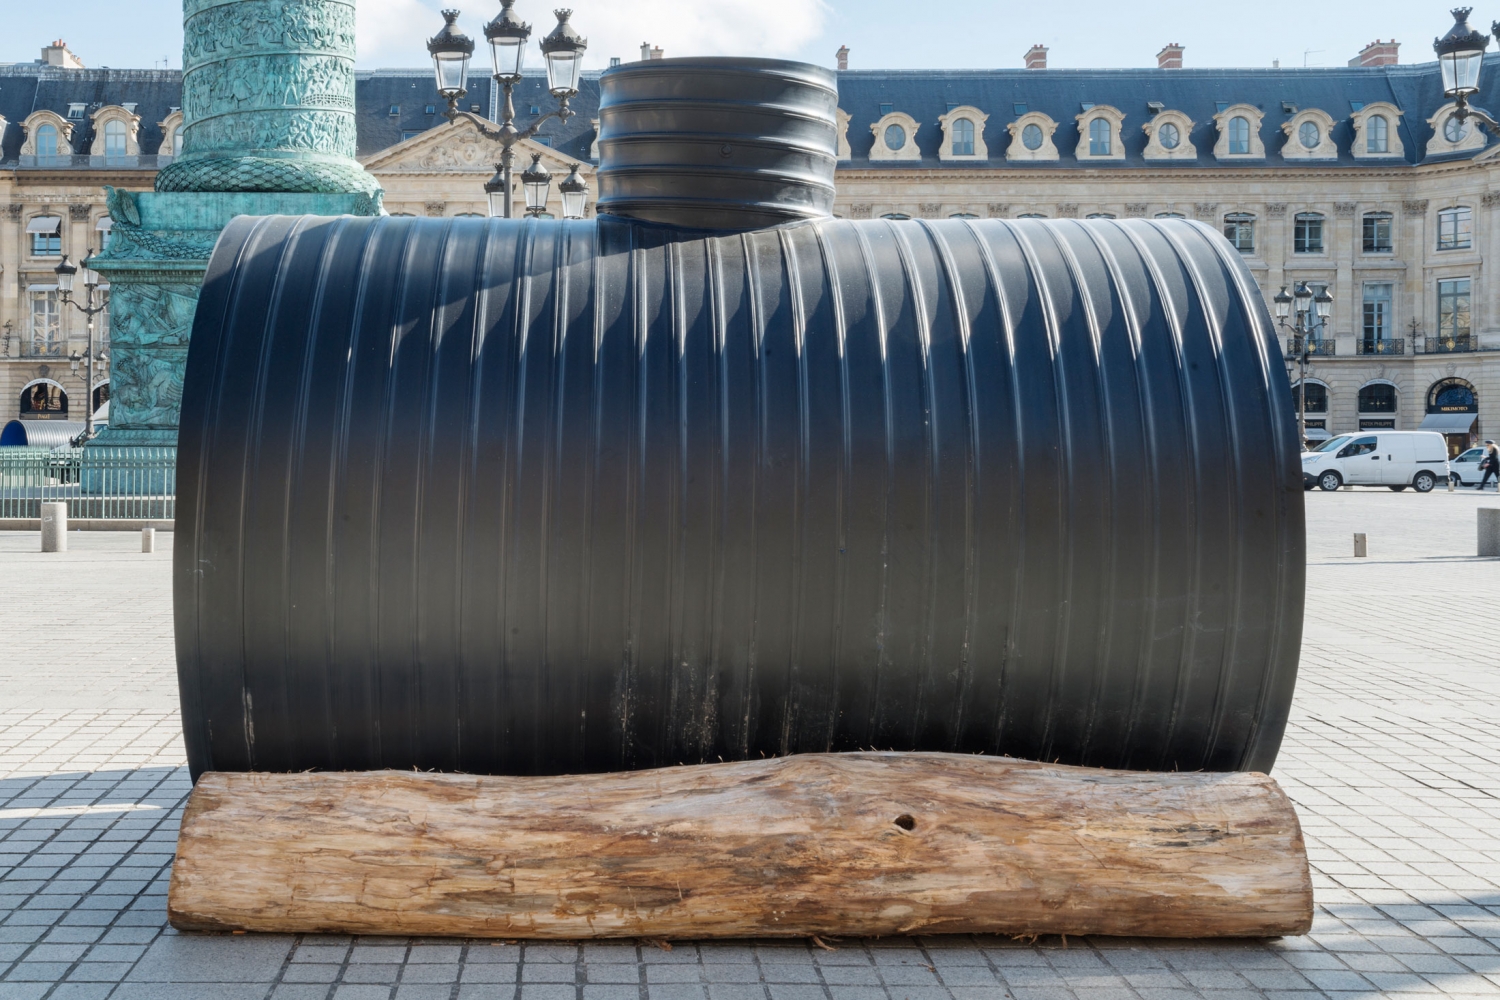 Oscar Tuazon

Rainwater, 2017

One of four elements in&amp;nbsp;Une Colonne d&amp;#39;Eau, 2017

Thermoplastic hoses, tree trunks

105 2/3&amp;nbsp;x 82 3/4 x 122 1/10 inches

(268&amp;nbsp;x 210&amp;nbsp;x 310 cm)

Installation view

Place Vend&amp;ocirc;me, Paris (October 16 &amp;ndash; November 9, 2017)

Photograph by Marc Domage